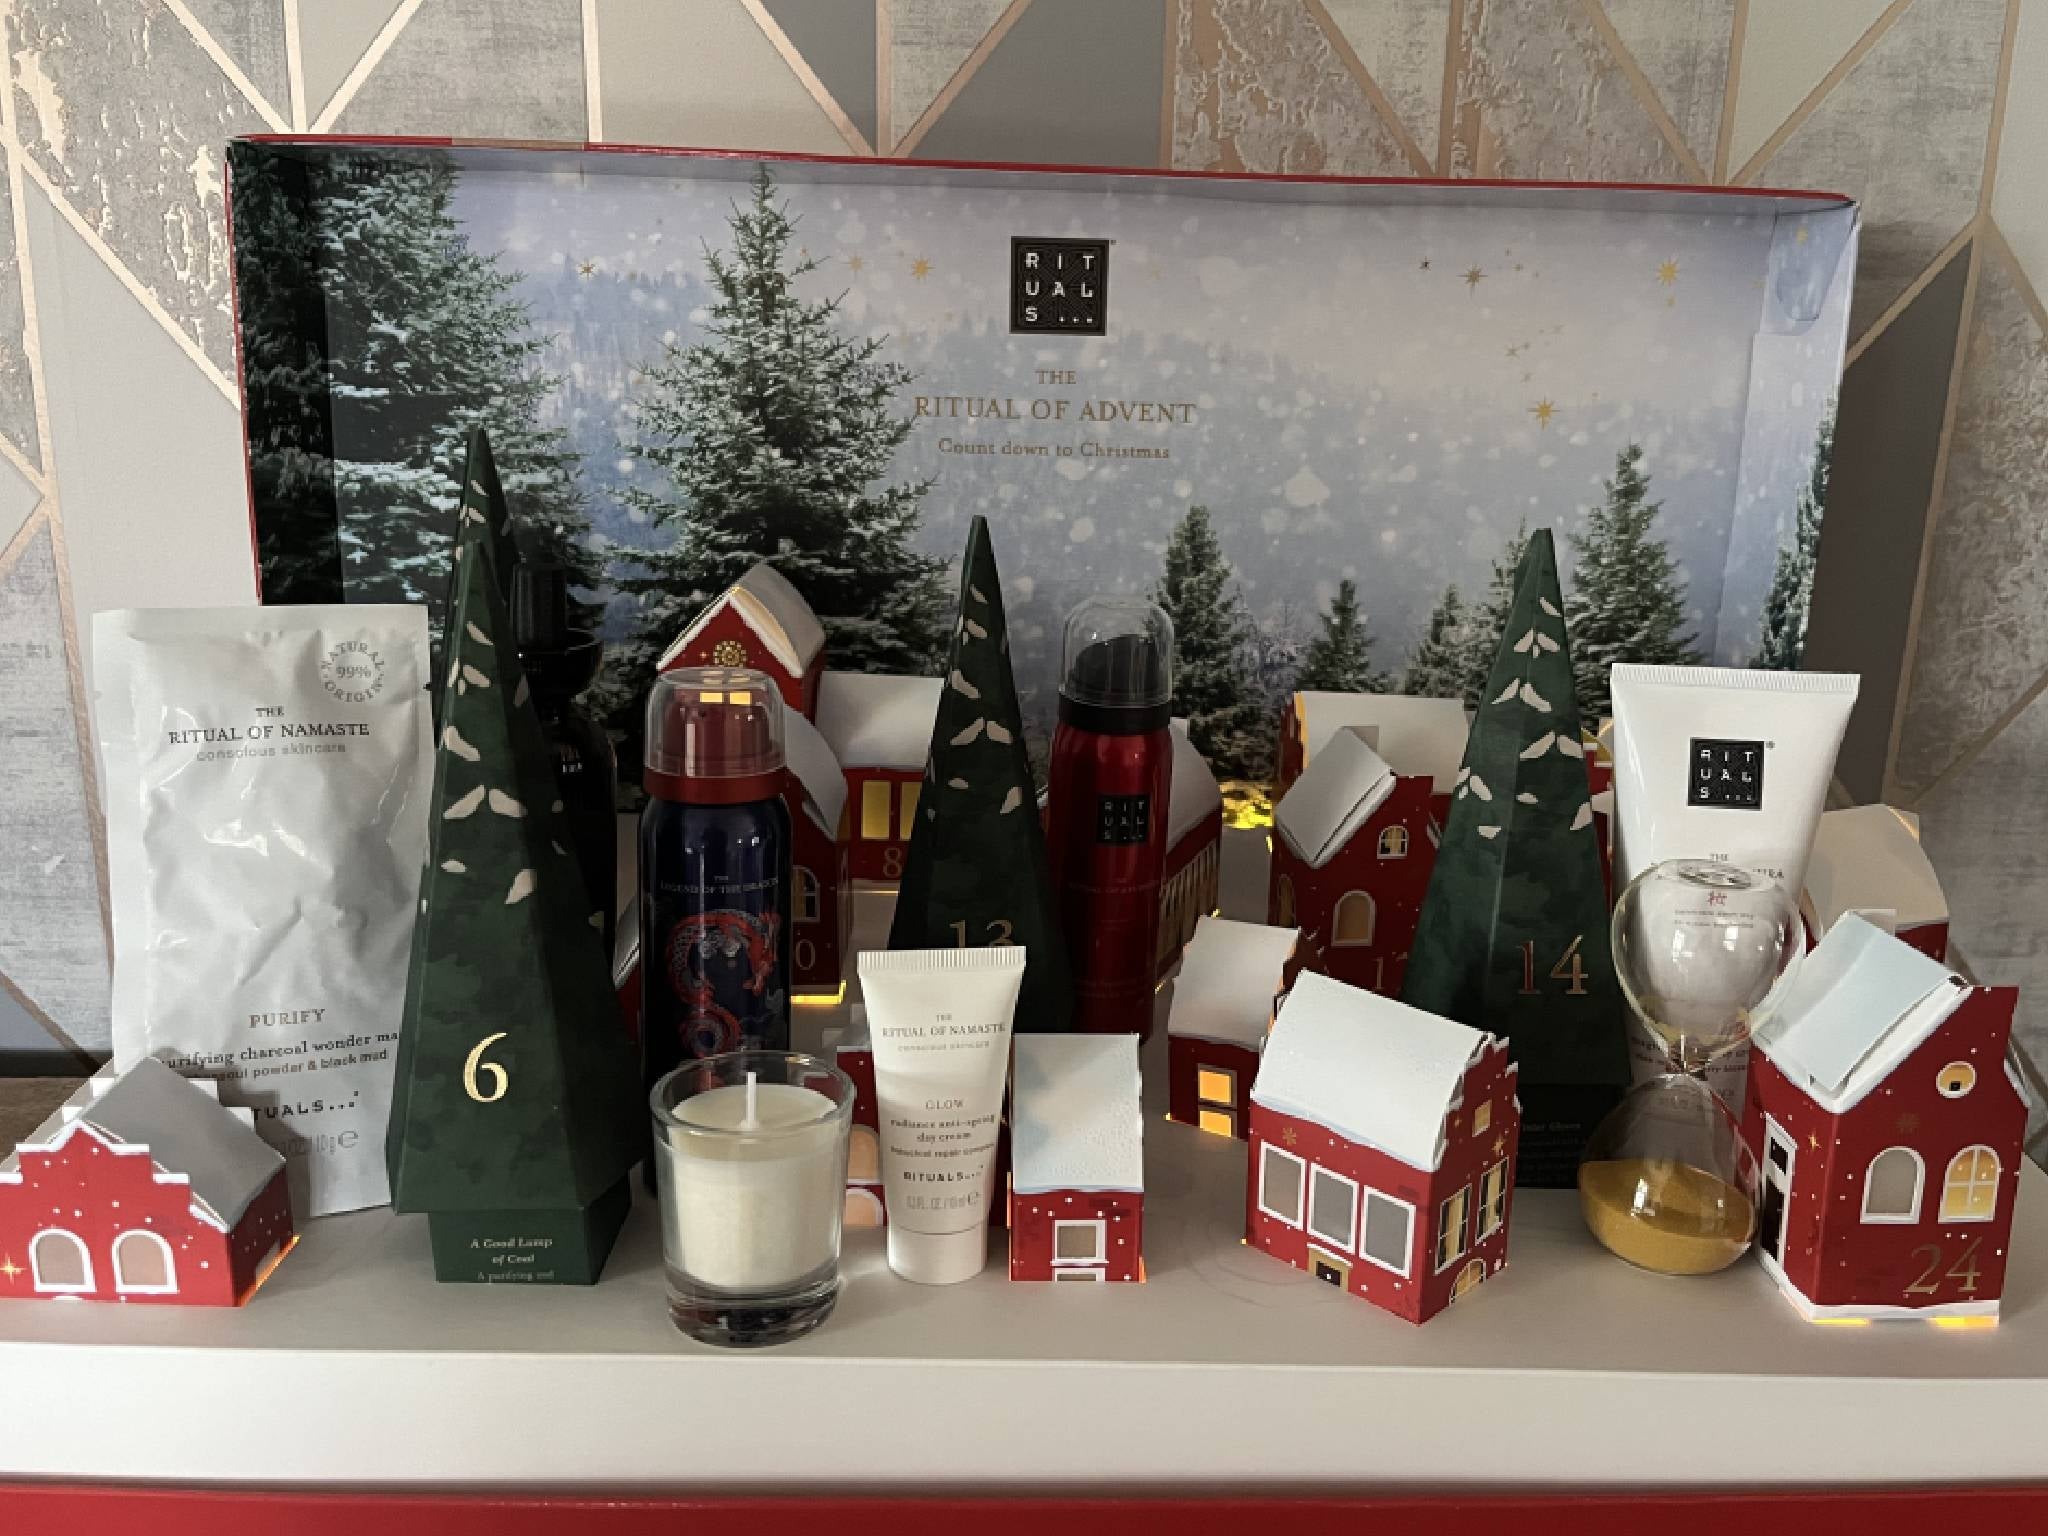 The Rituals deluxe advent calendar in all of its glory